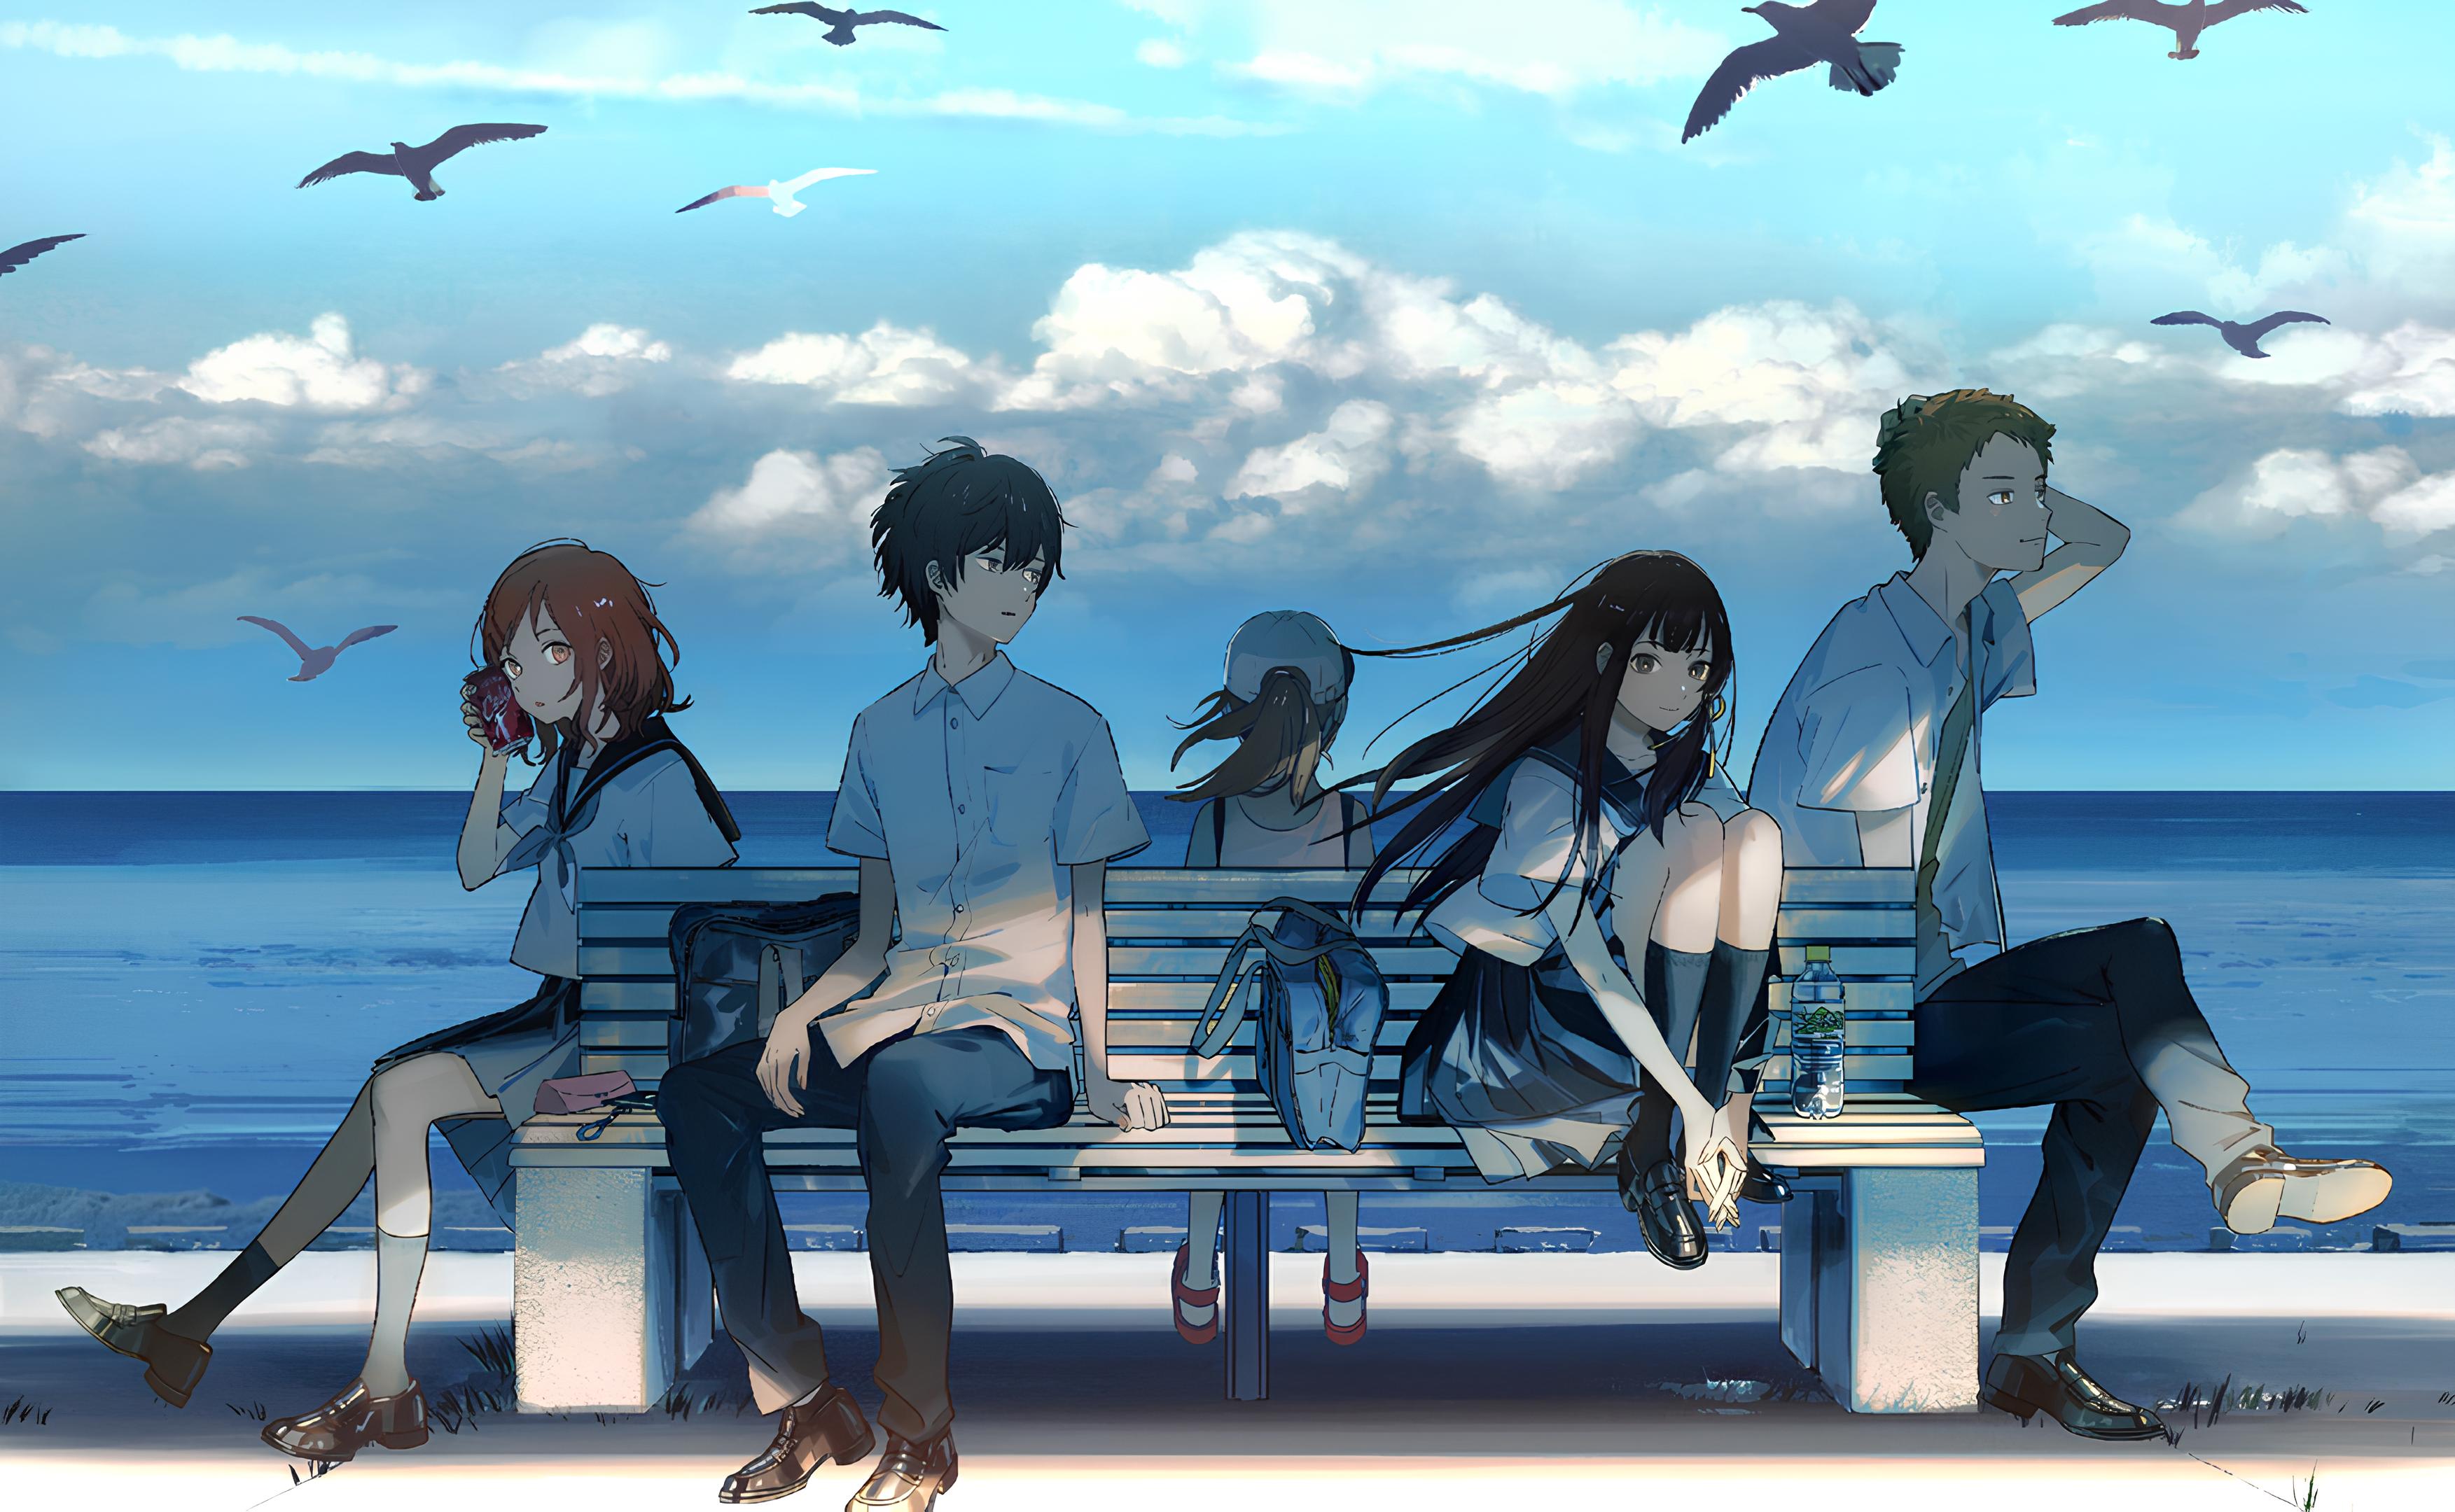 The Tunnel To Summer The Exit Of Goodbye Dark Hair People Sea Bench Water Anime Boys Anime Girls Sky 3506x2160